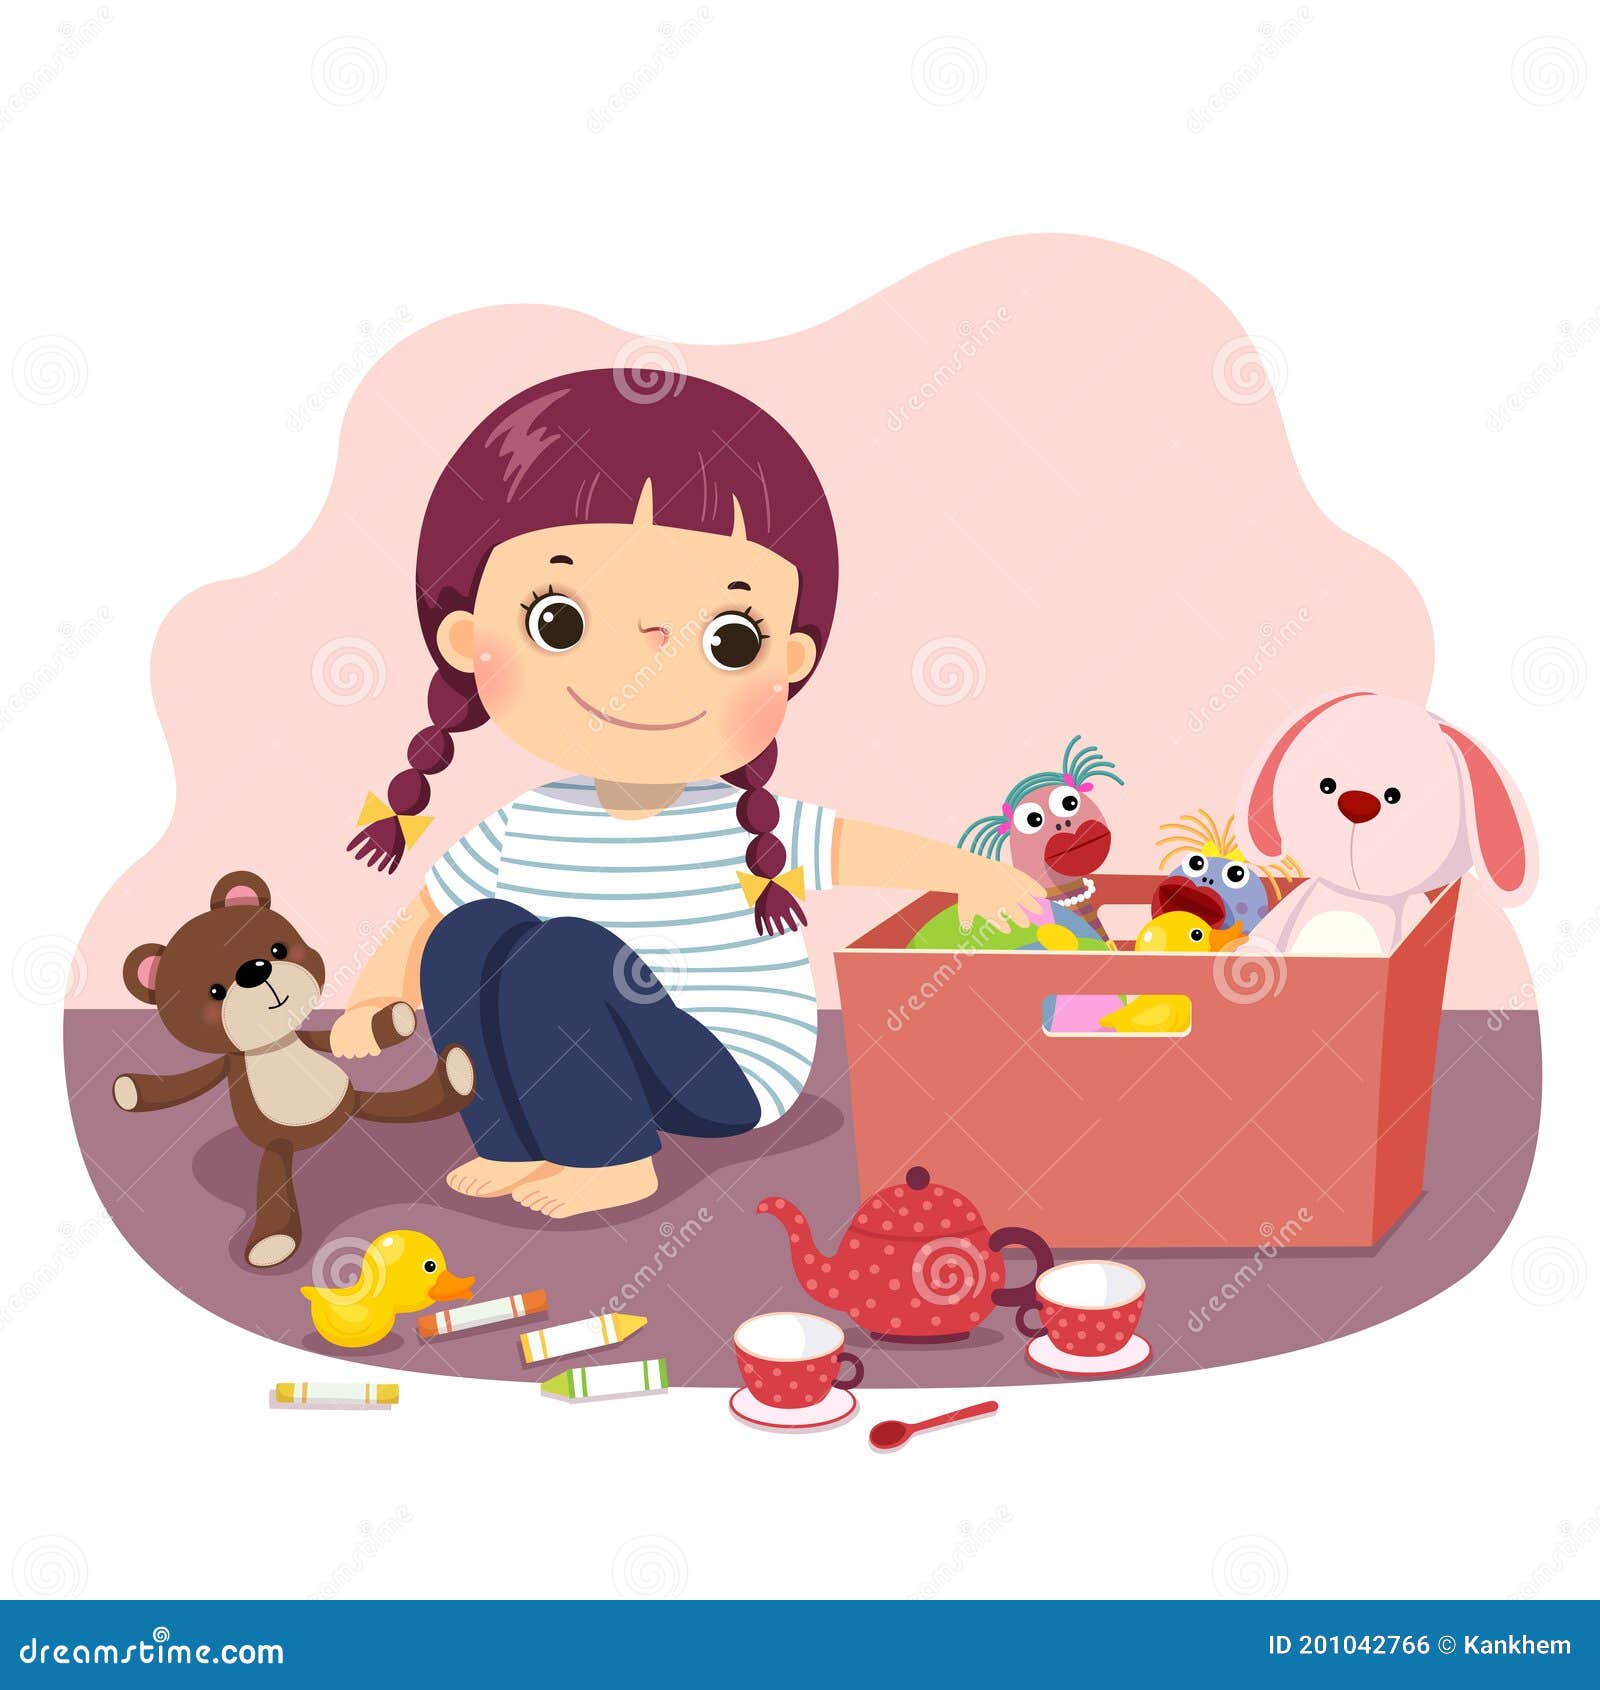 Cartoon of a Little Girl Putting Her Toys into the Box. Kids Doing  Housework Chores at Home Concept Stock Vector - Illustration of cute, kids:  201042766